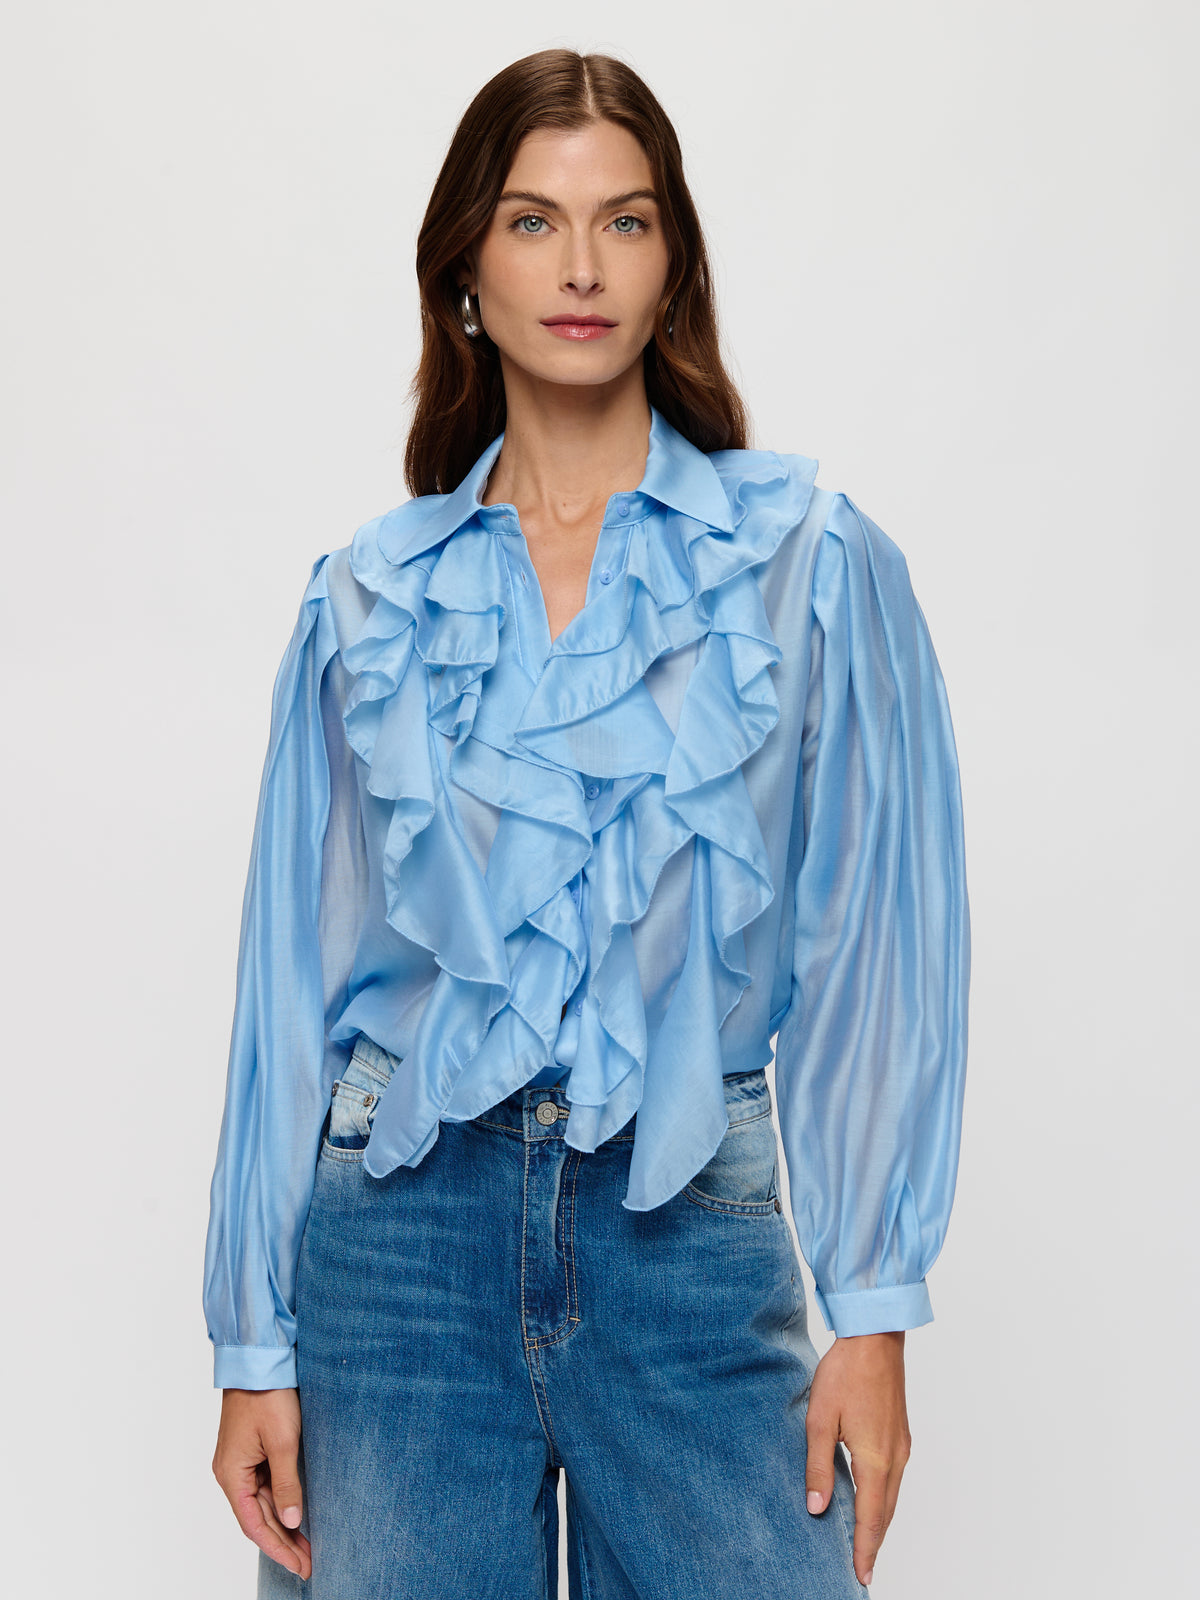 Ruffle Detail Button Up Blouse